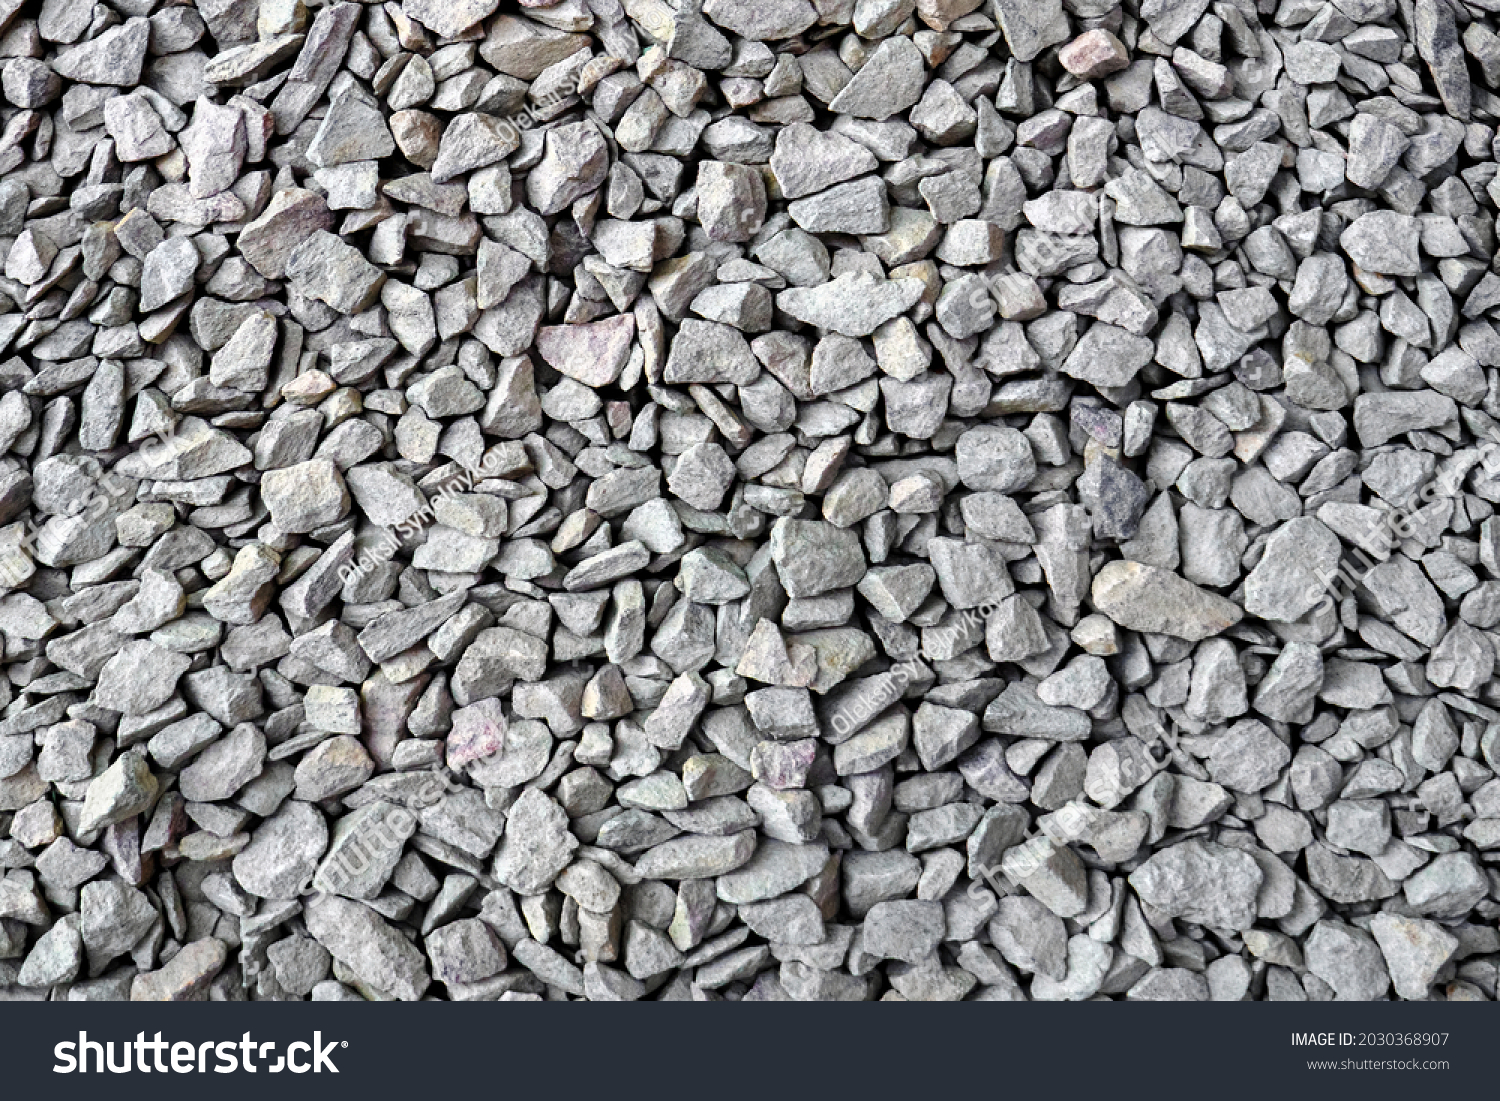 Crushed rock close up. Small rocks ground. Crushed stone road building material gravel texture. Small stone construction material rock. Garden gravel background stone landscaping. Driveway gravel road #2030368907